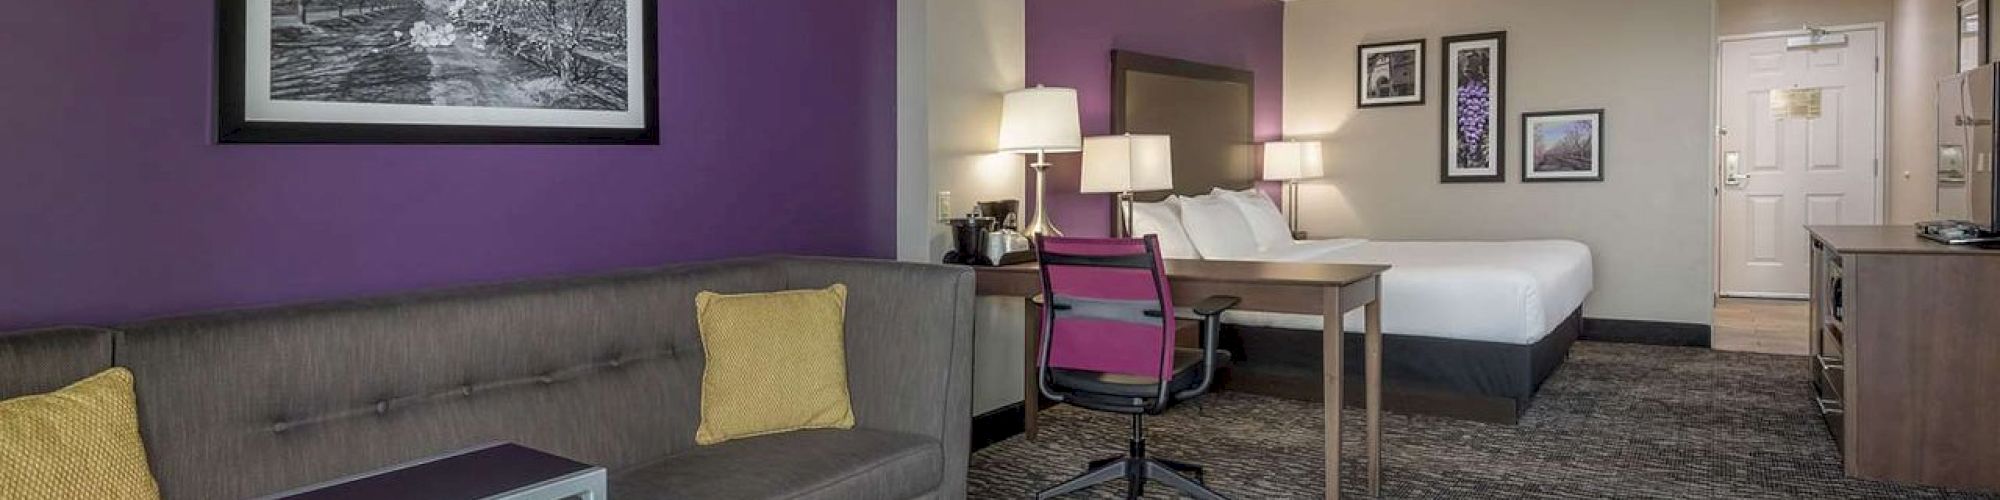 A modern hotel room features a seating area, a desk, a bed, and framed artworks on purple walls, providing a cozy and inviting ambiance.